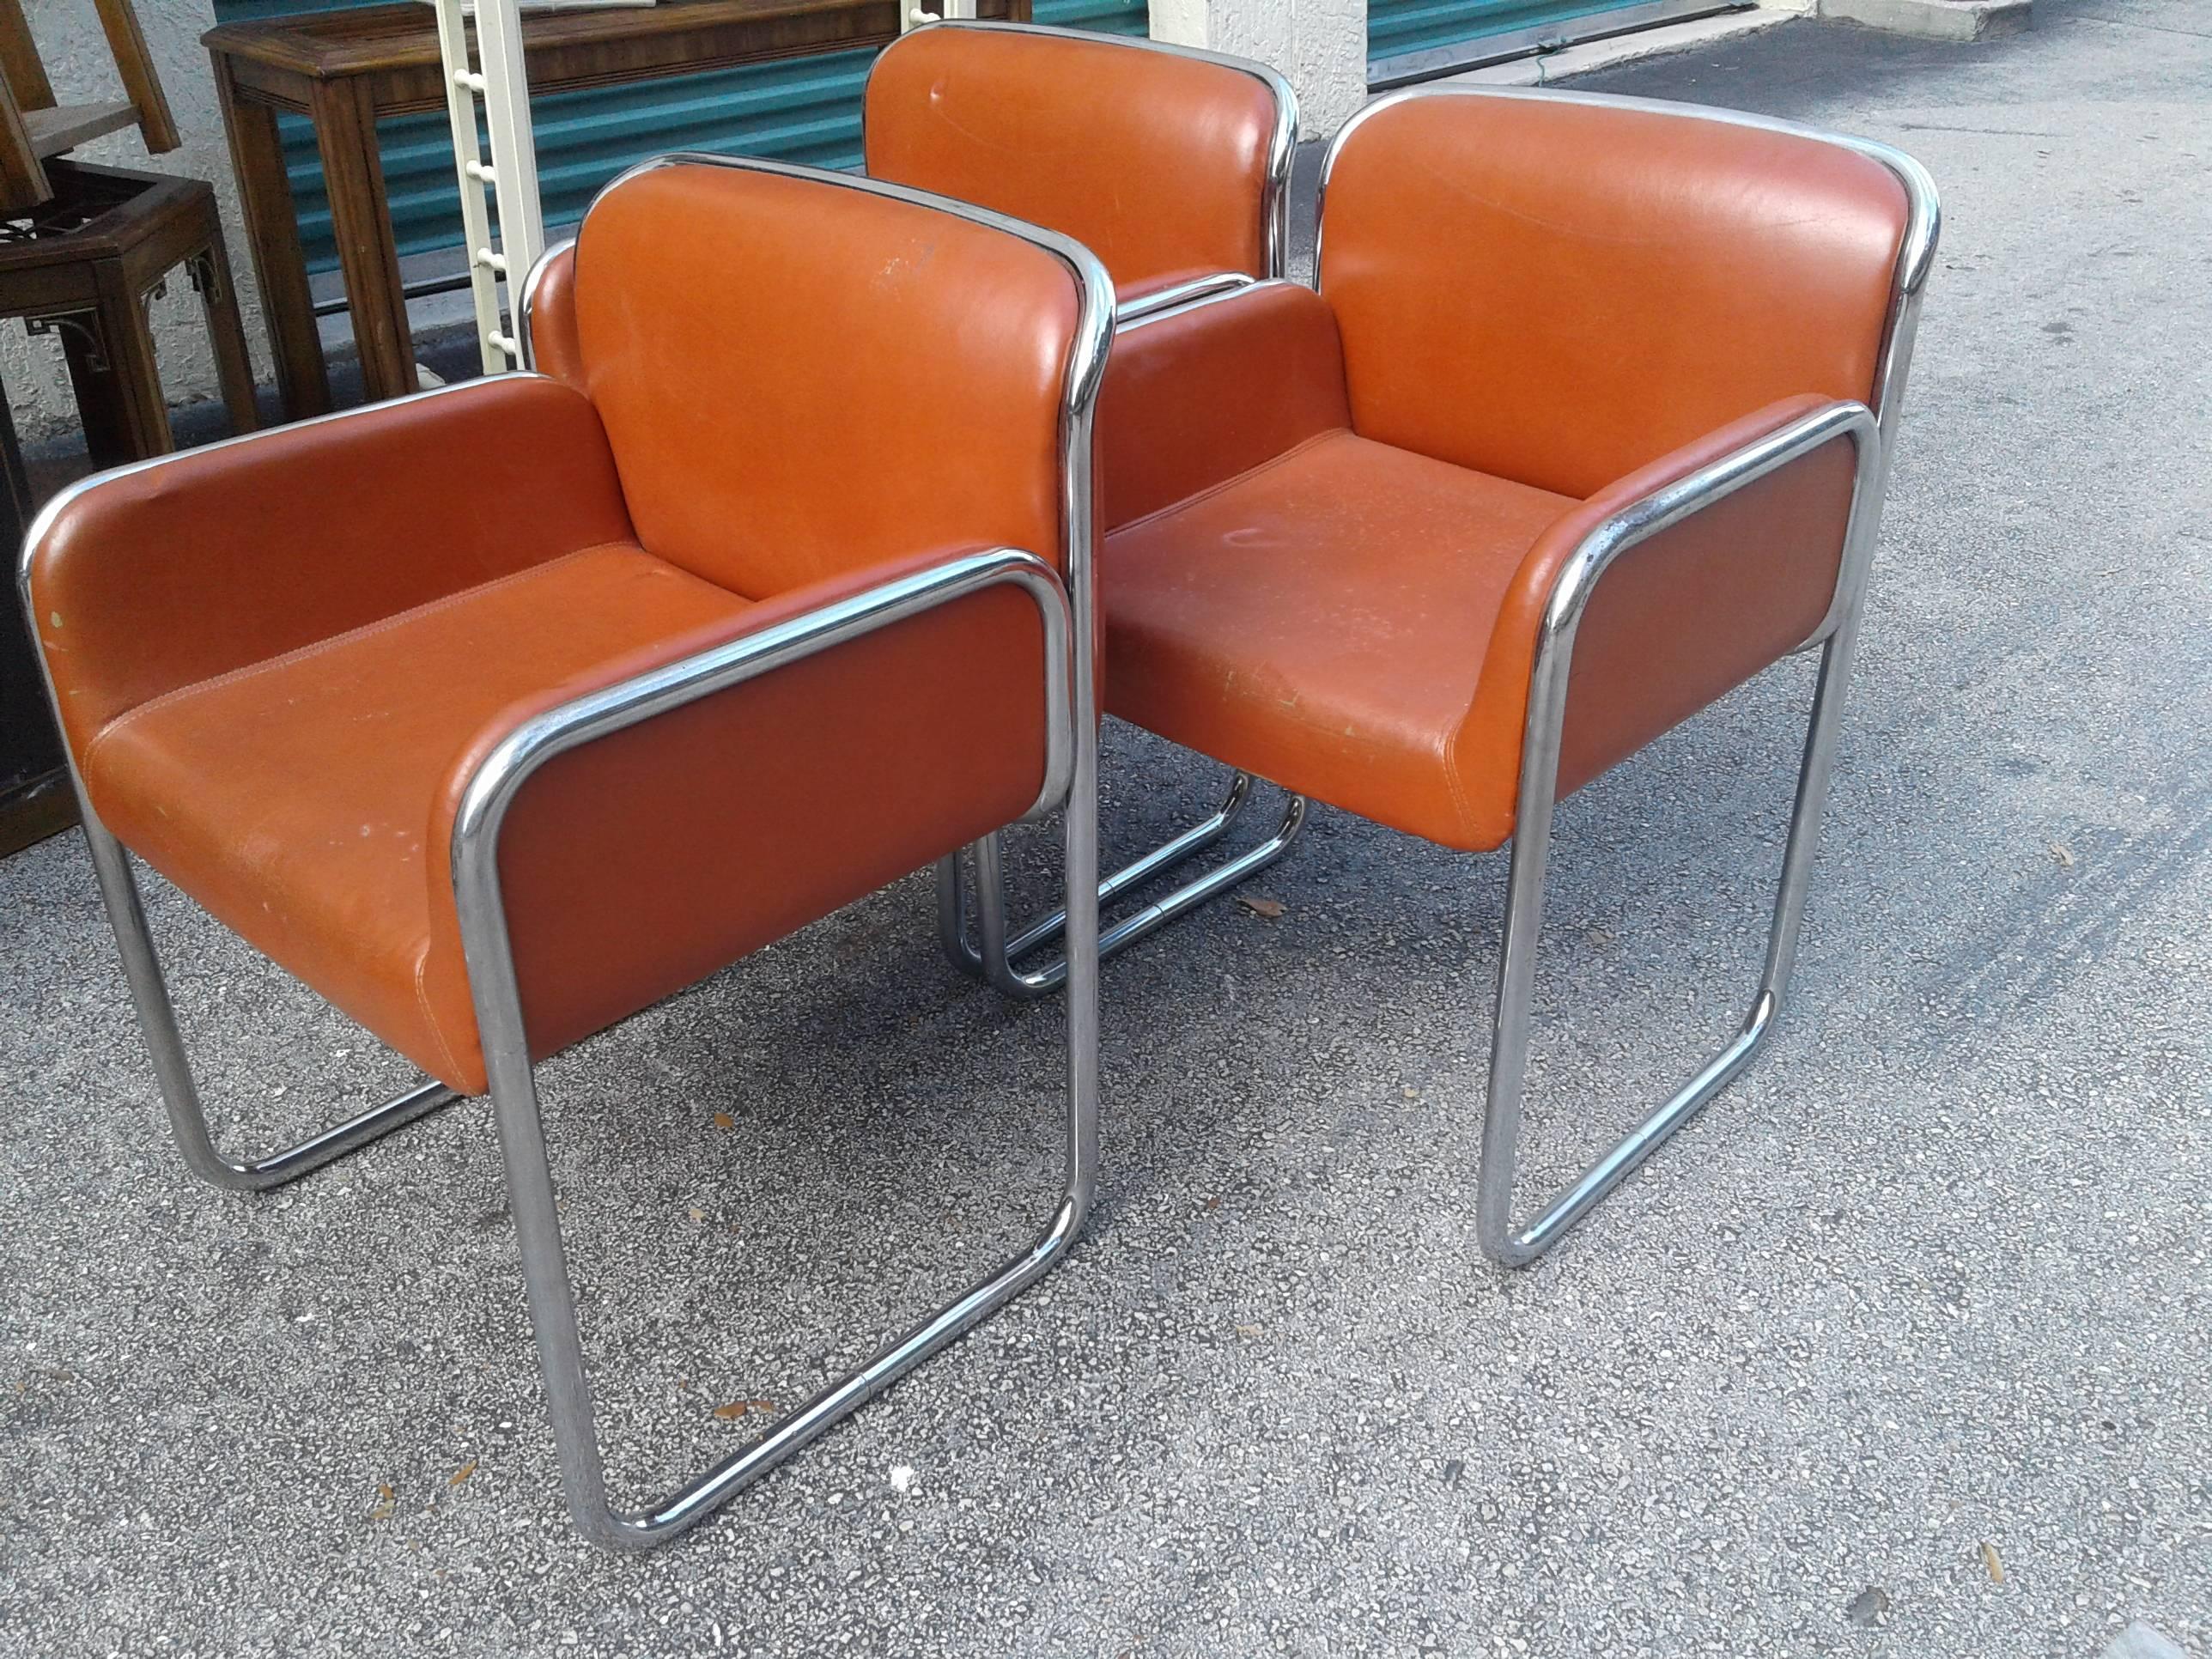 Vintage Mid Century Modern John Stuart chrome armchairs with stickers underneath, pictures. The chrome is in good condition however the original upholstery will need to be replaced. These chairs are very heavy, sturdy and comfortable. Two  available.